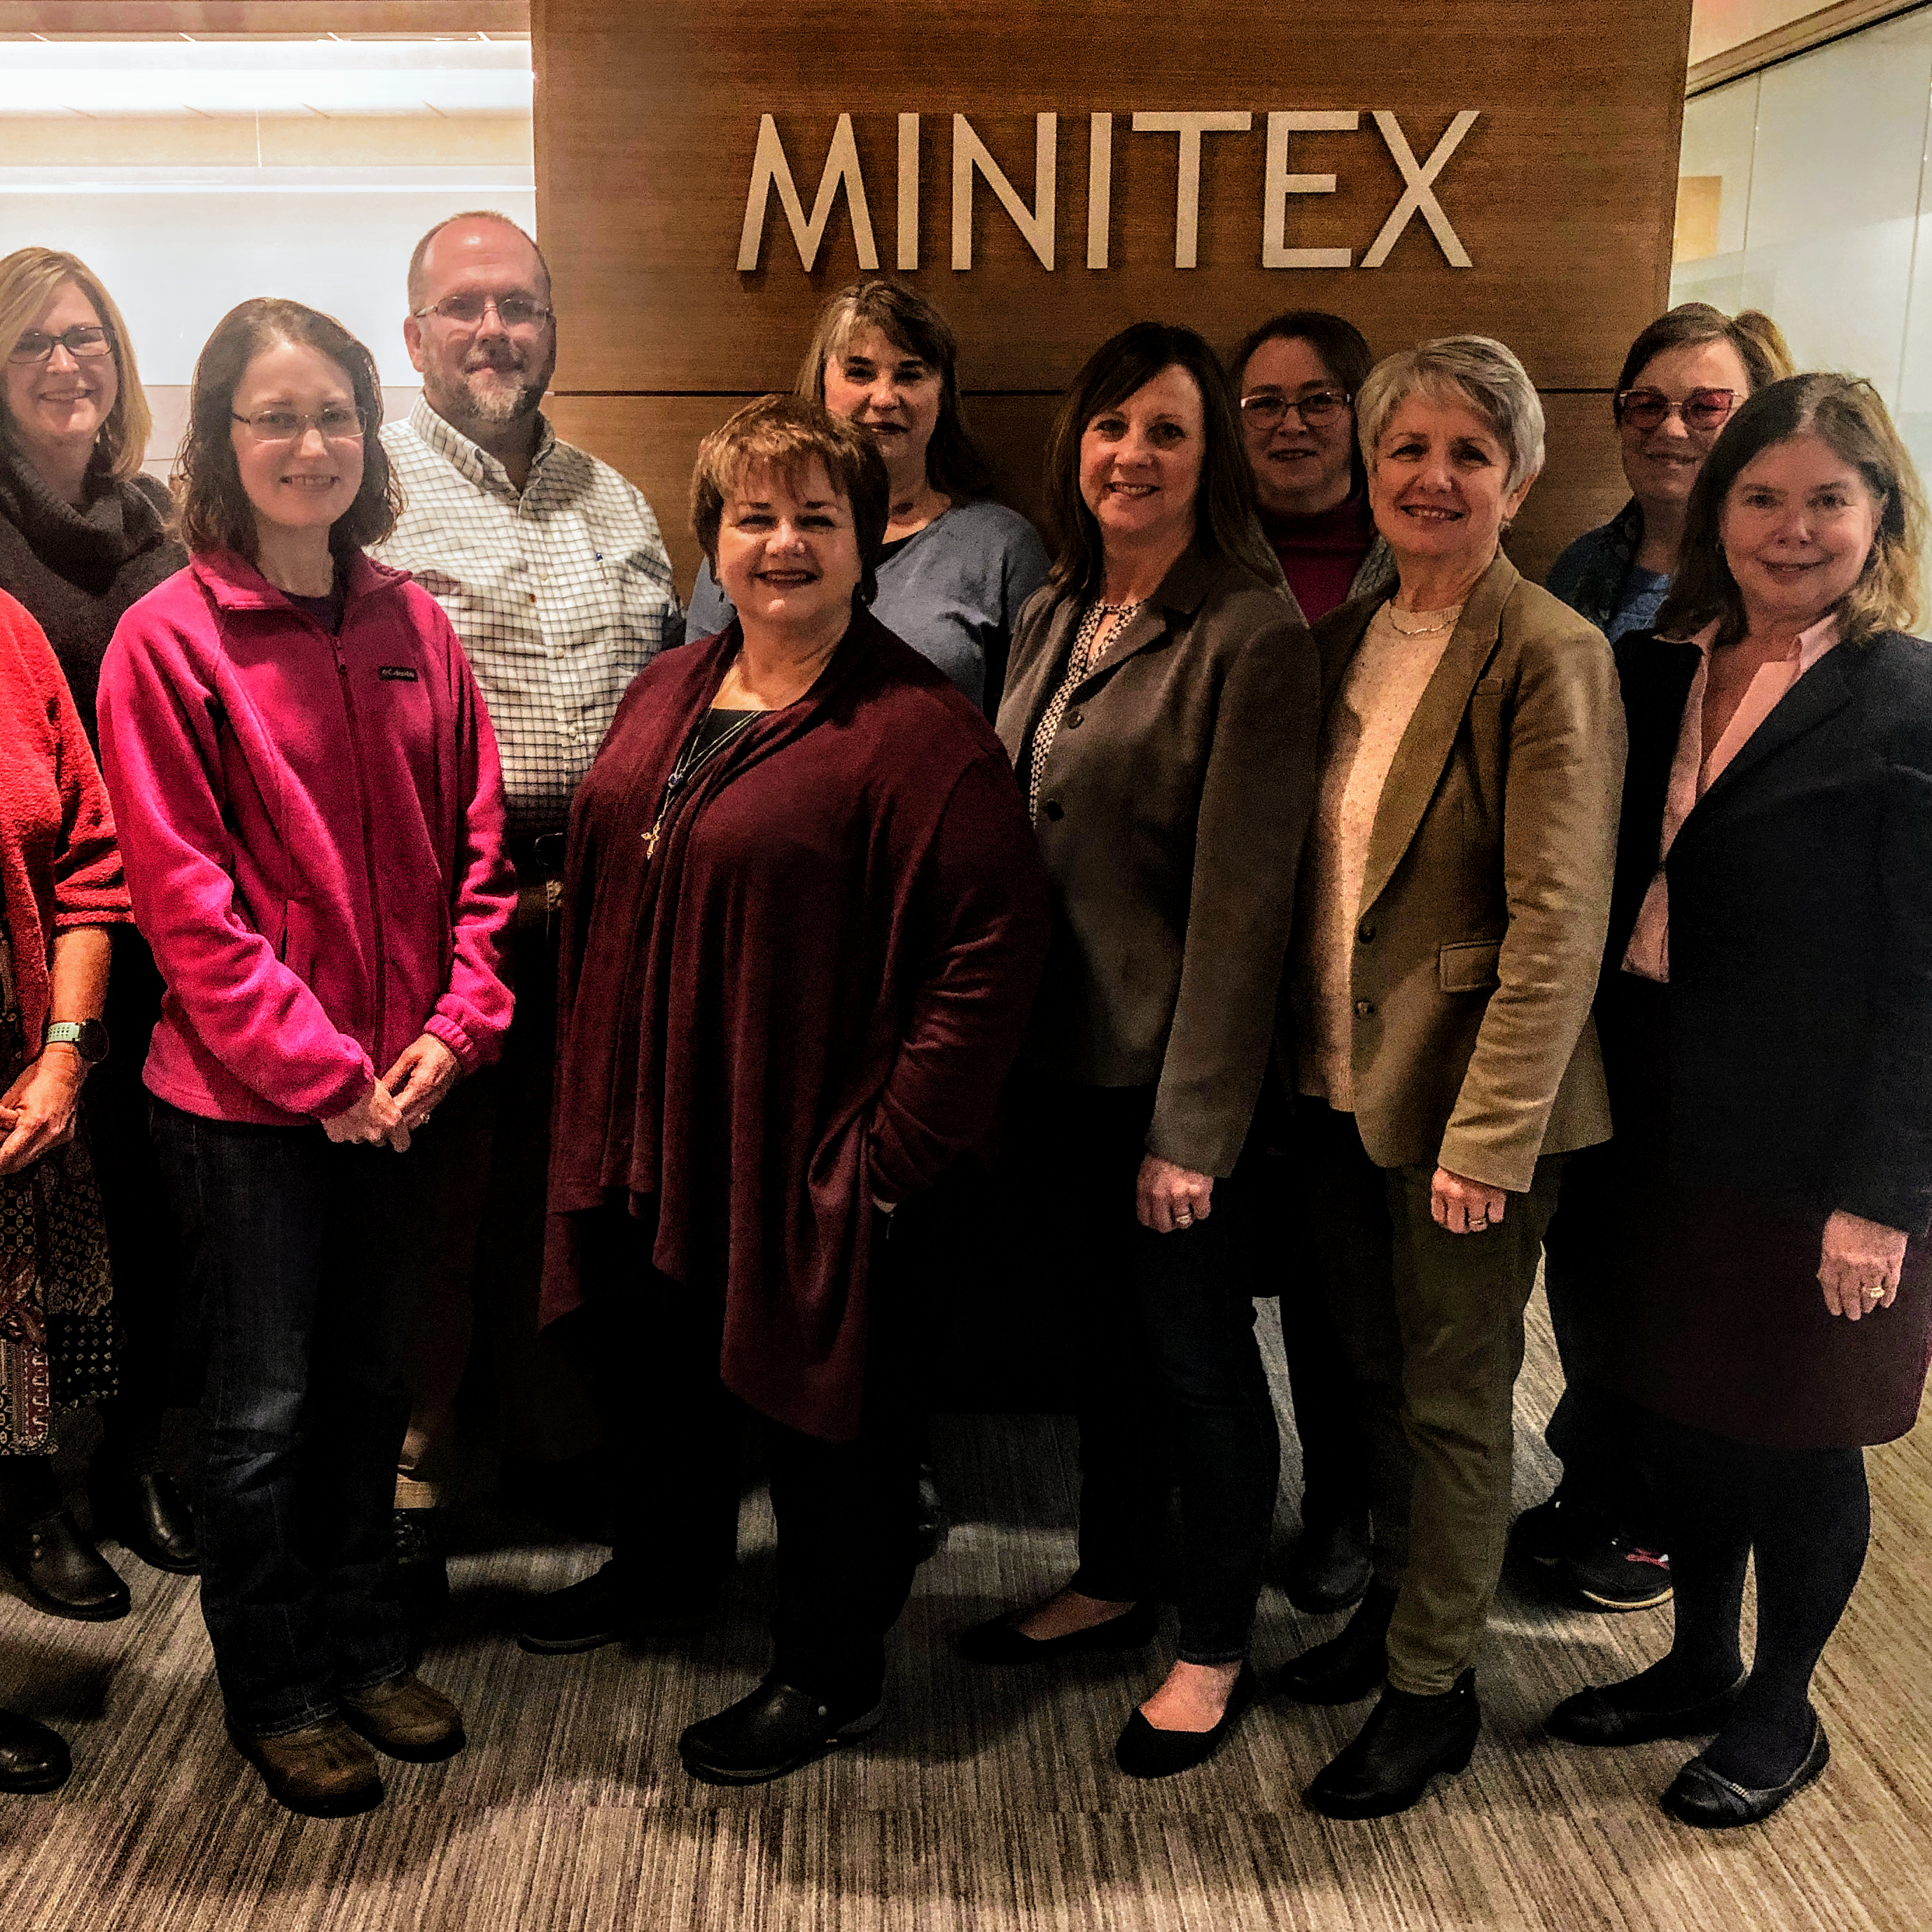 A photograph of Minitex Policy Advisory Council members taken in the front lobby of the Minitex offices.